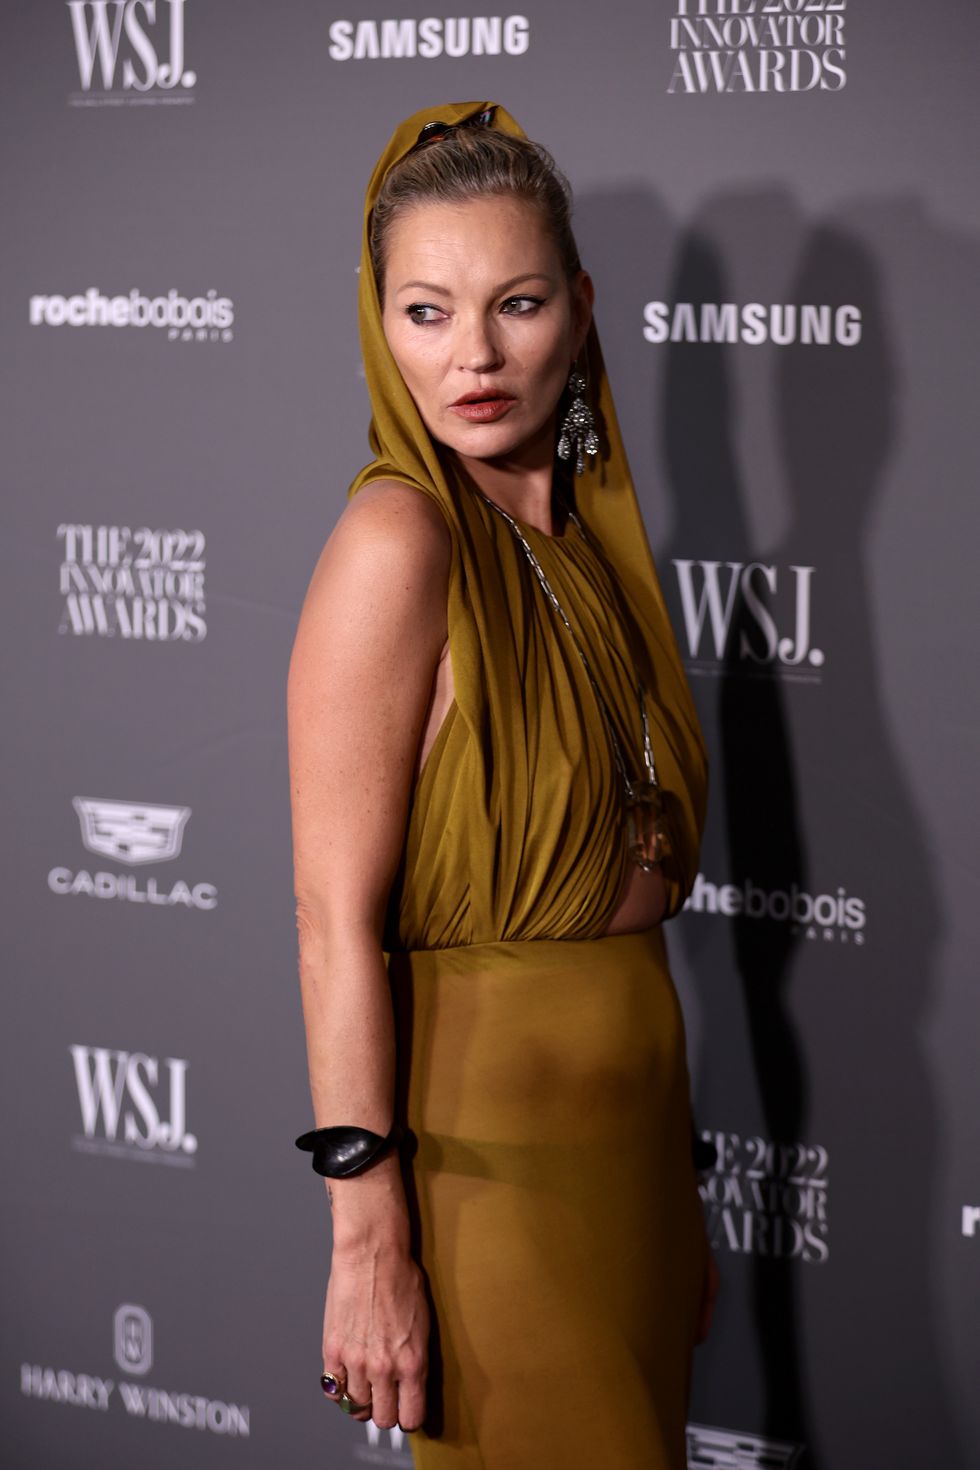 new york, new york november 02 kate moss attends the wsj magazine 2022 innovator awards at the museum of modern art on november 02, 2022 in new york city photo by dimitrios kambourisgetty images for wsj magazine innovators awards